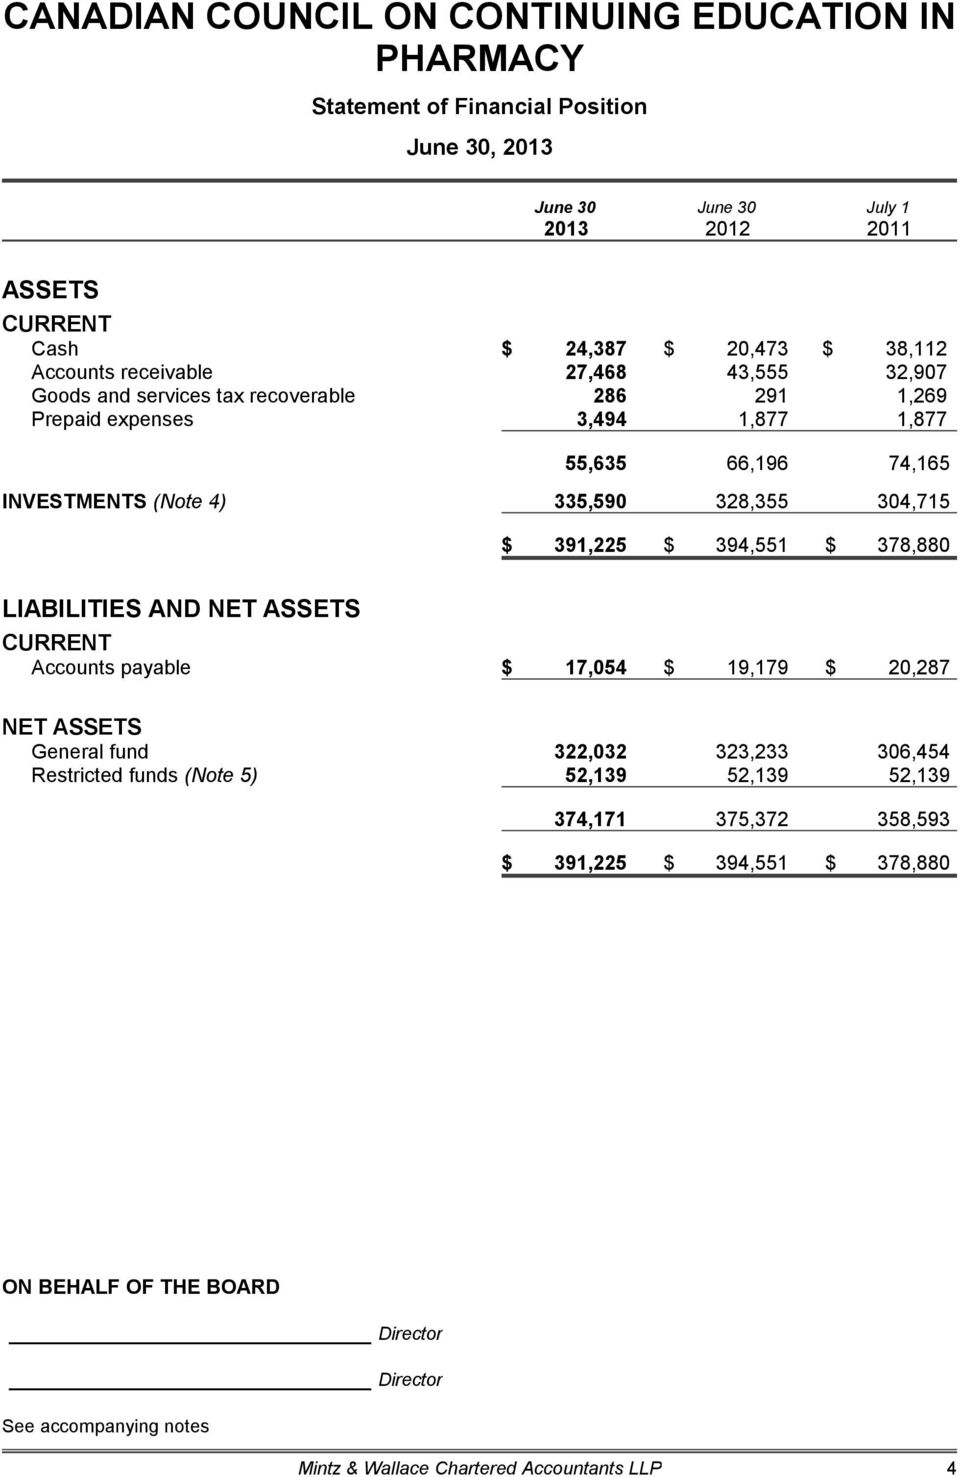 378,880 LIABILITIES AND NET ASSETS CURRENT Accounts payable $ 17,054 $ 19,179 $ 20,287 NET ASSETS General fund 322,032 323,233 306,454 Restricted funds (Note 5) 52,139